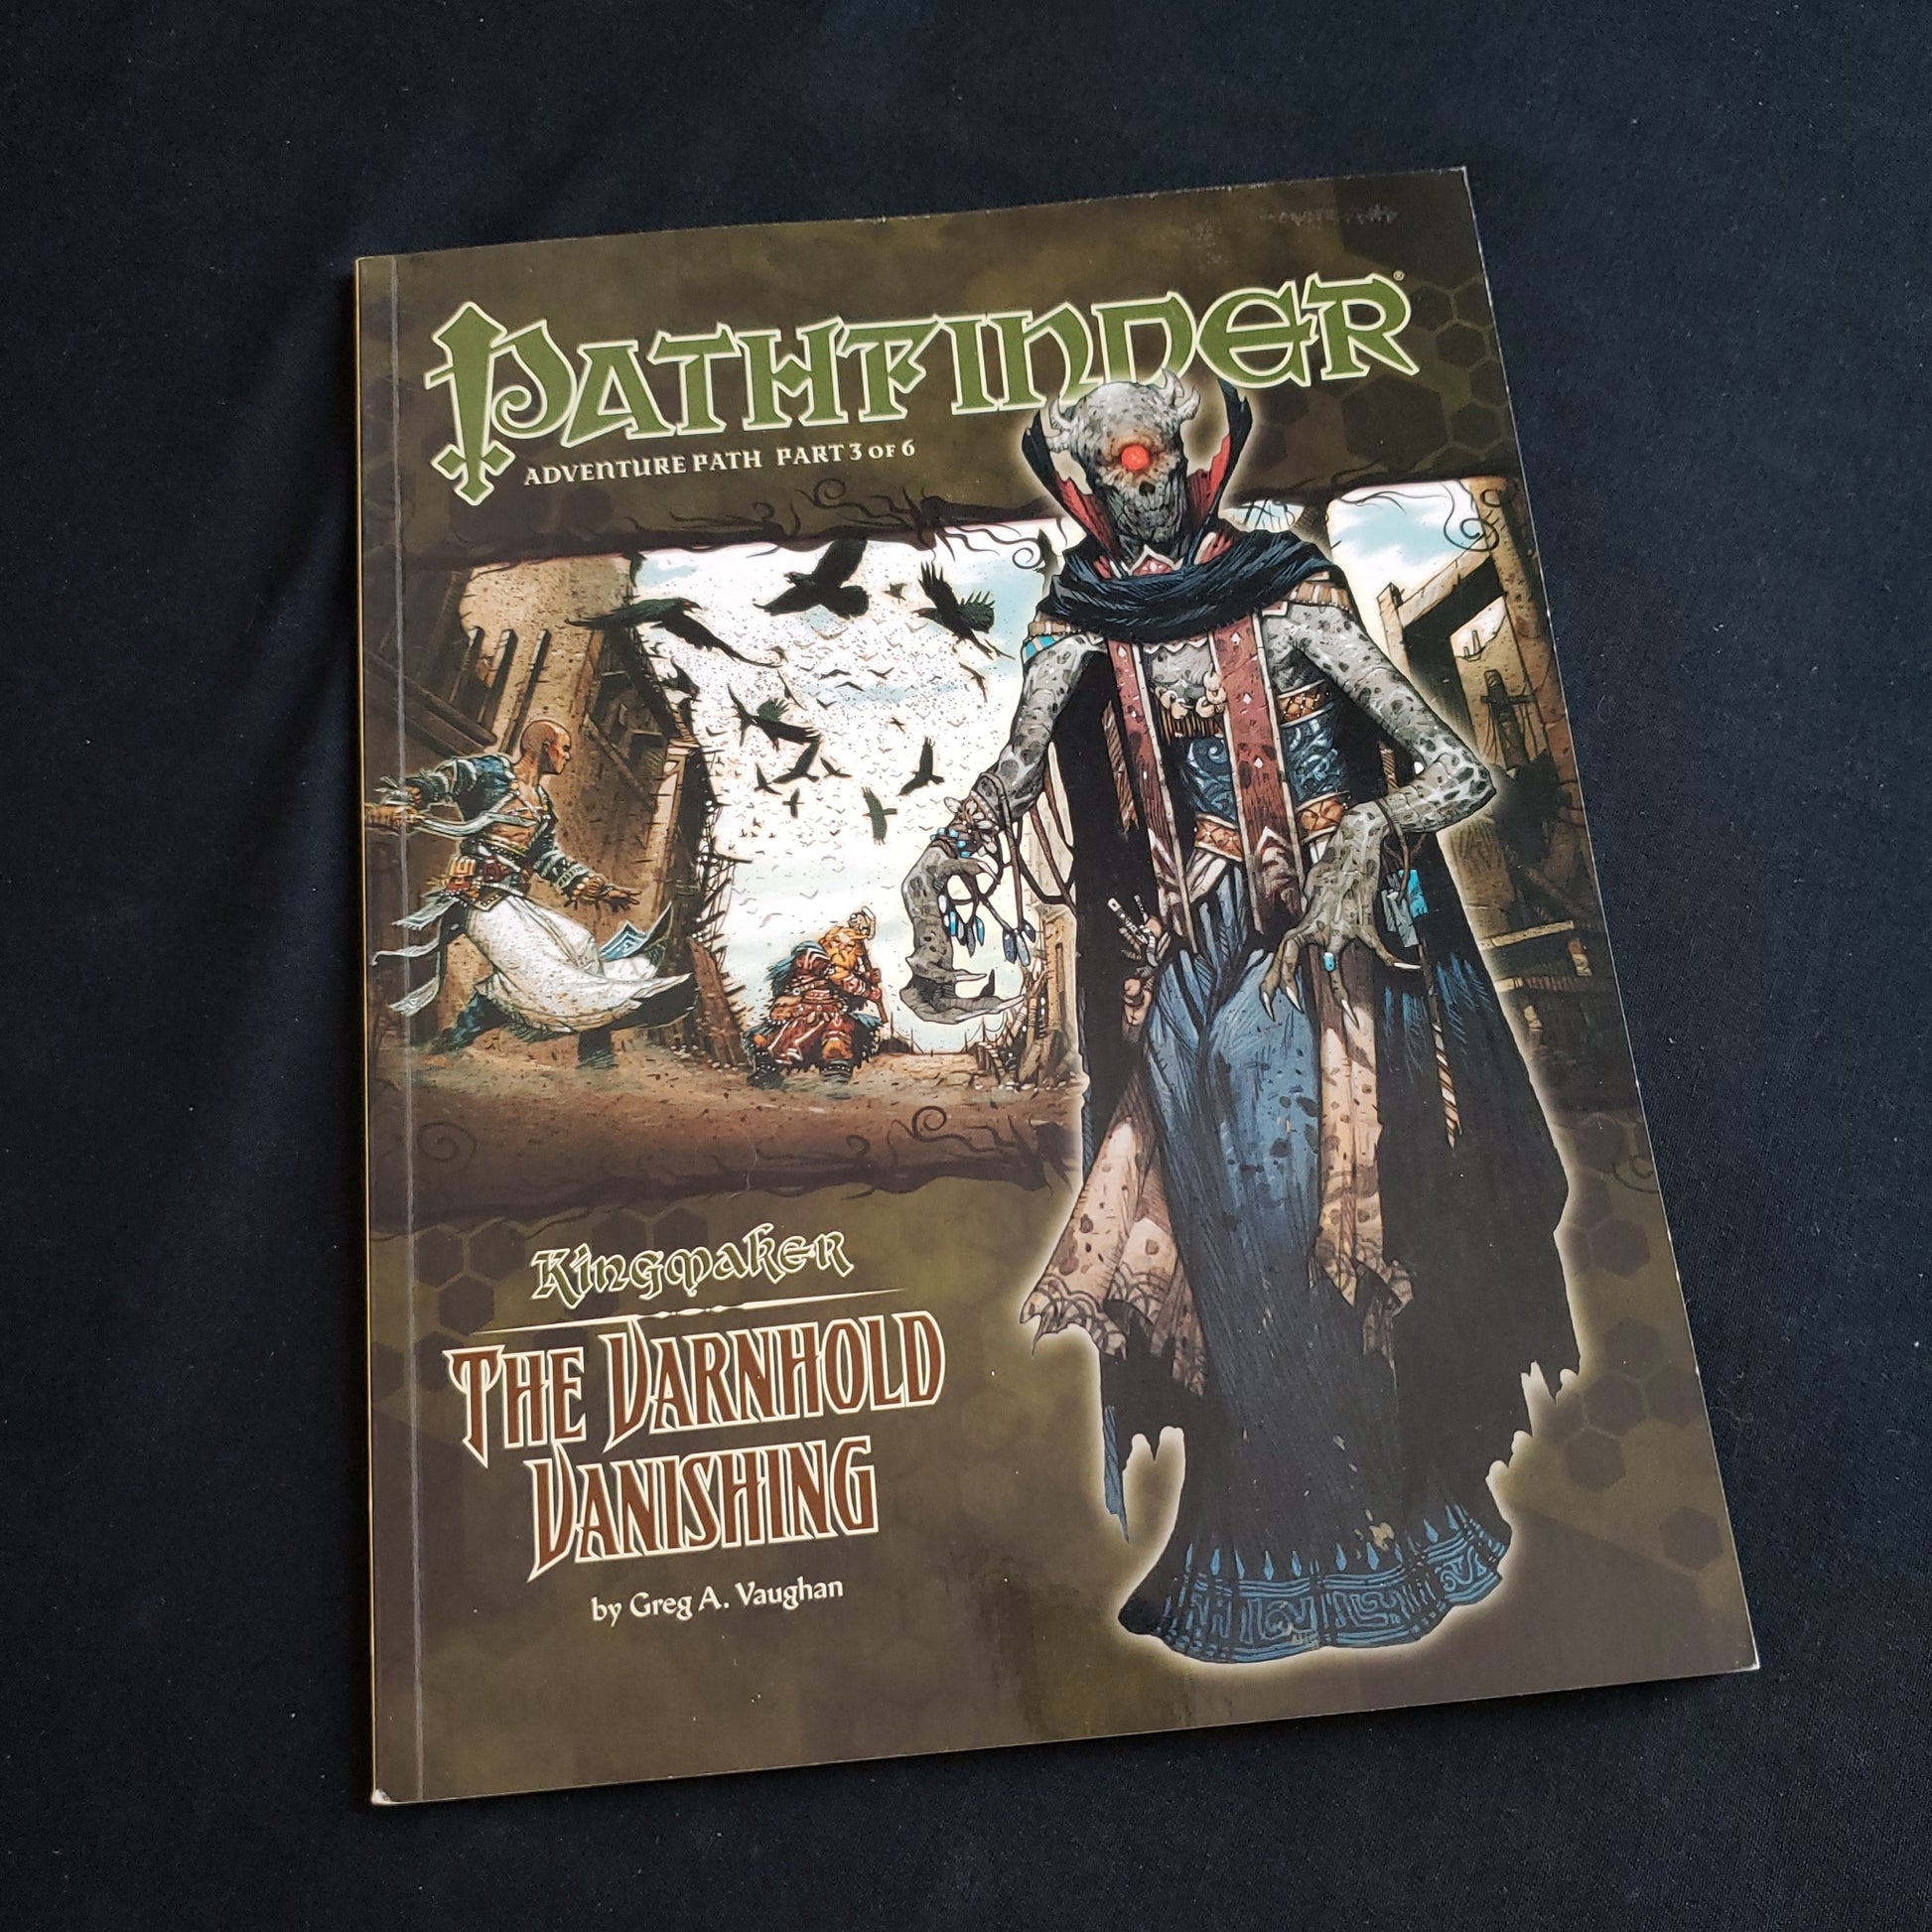 Image shows the front cover of the Varnhold Vanishing book for the Pathfinder First Edition roleplaying game